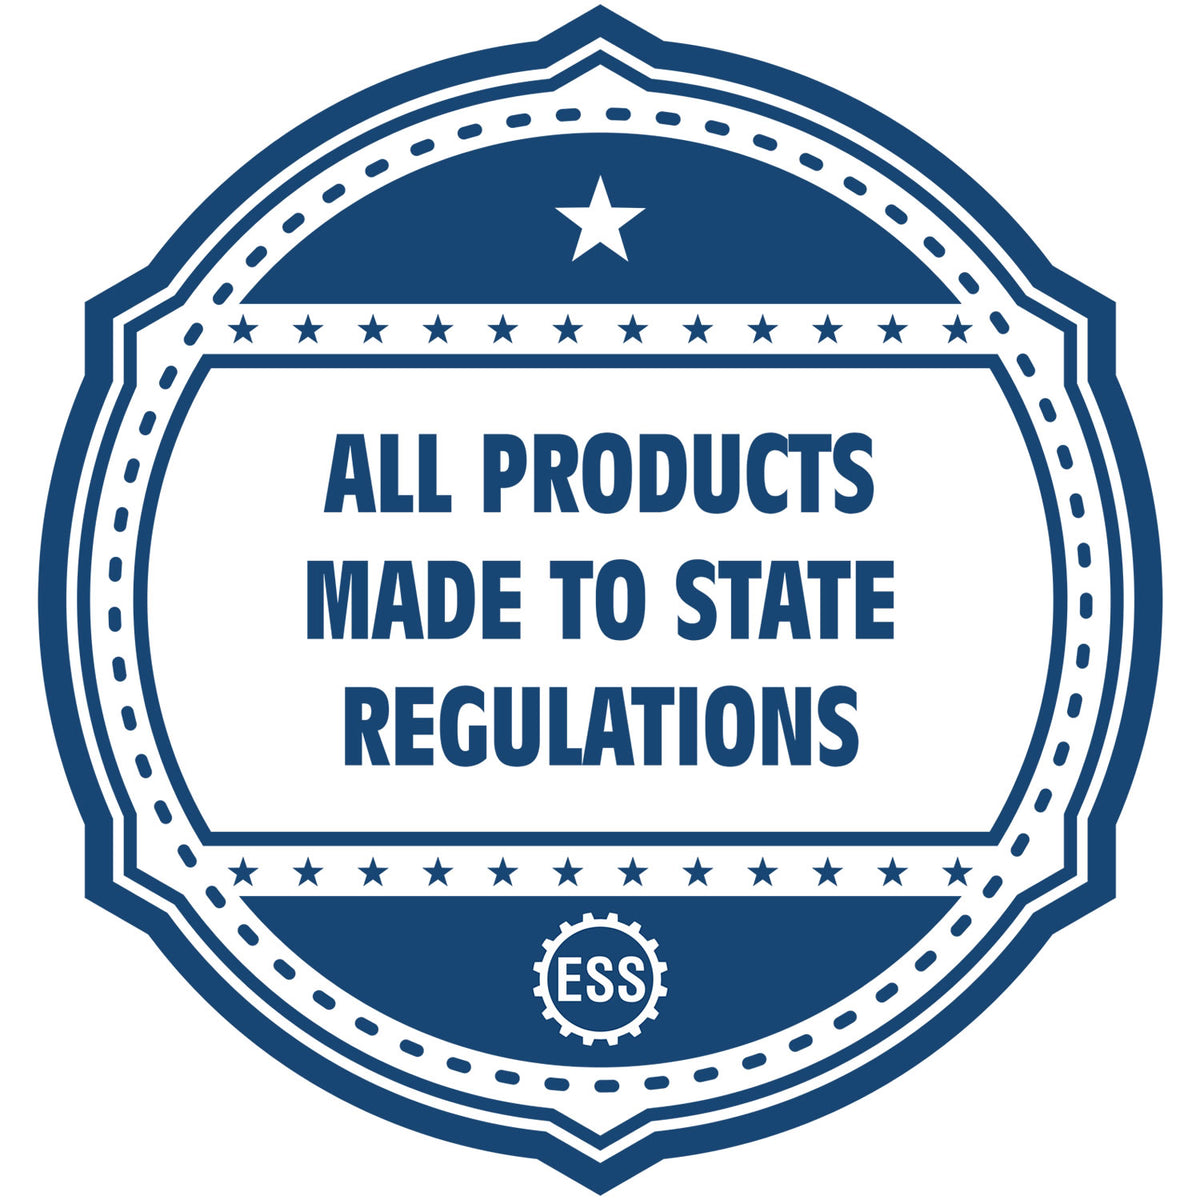 An icon or badge element for the Digital Iowa PE Stamp and Electronic Seal for Iowa Engineer showing that this product is made in compliance with state regulations.